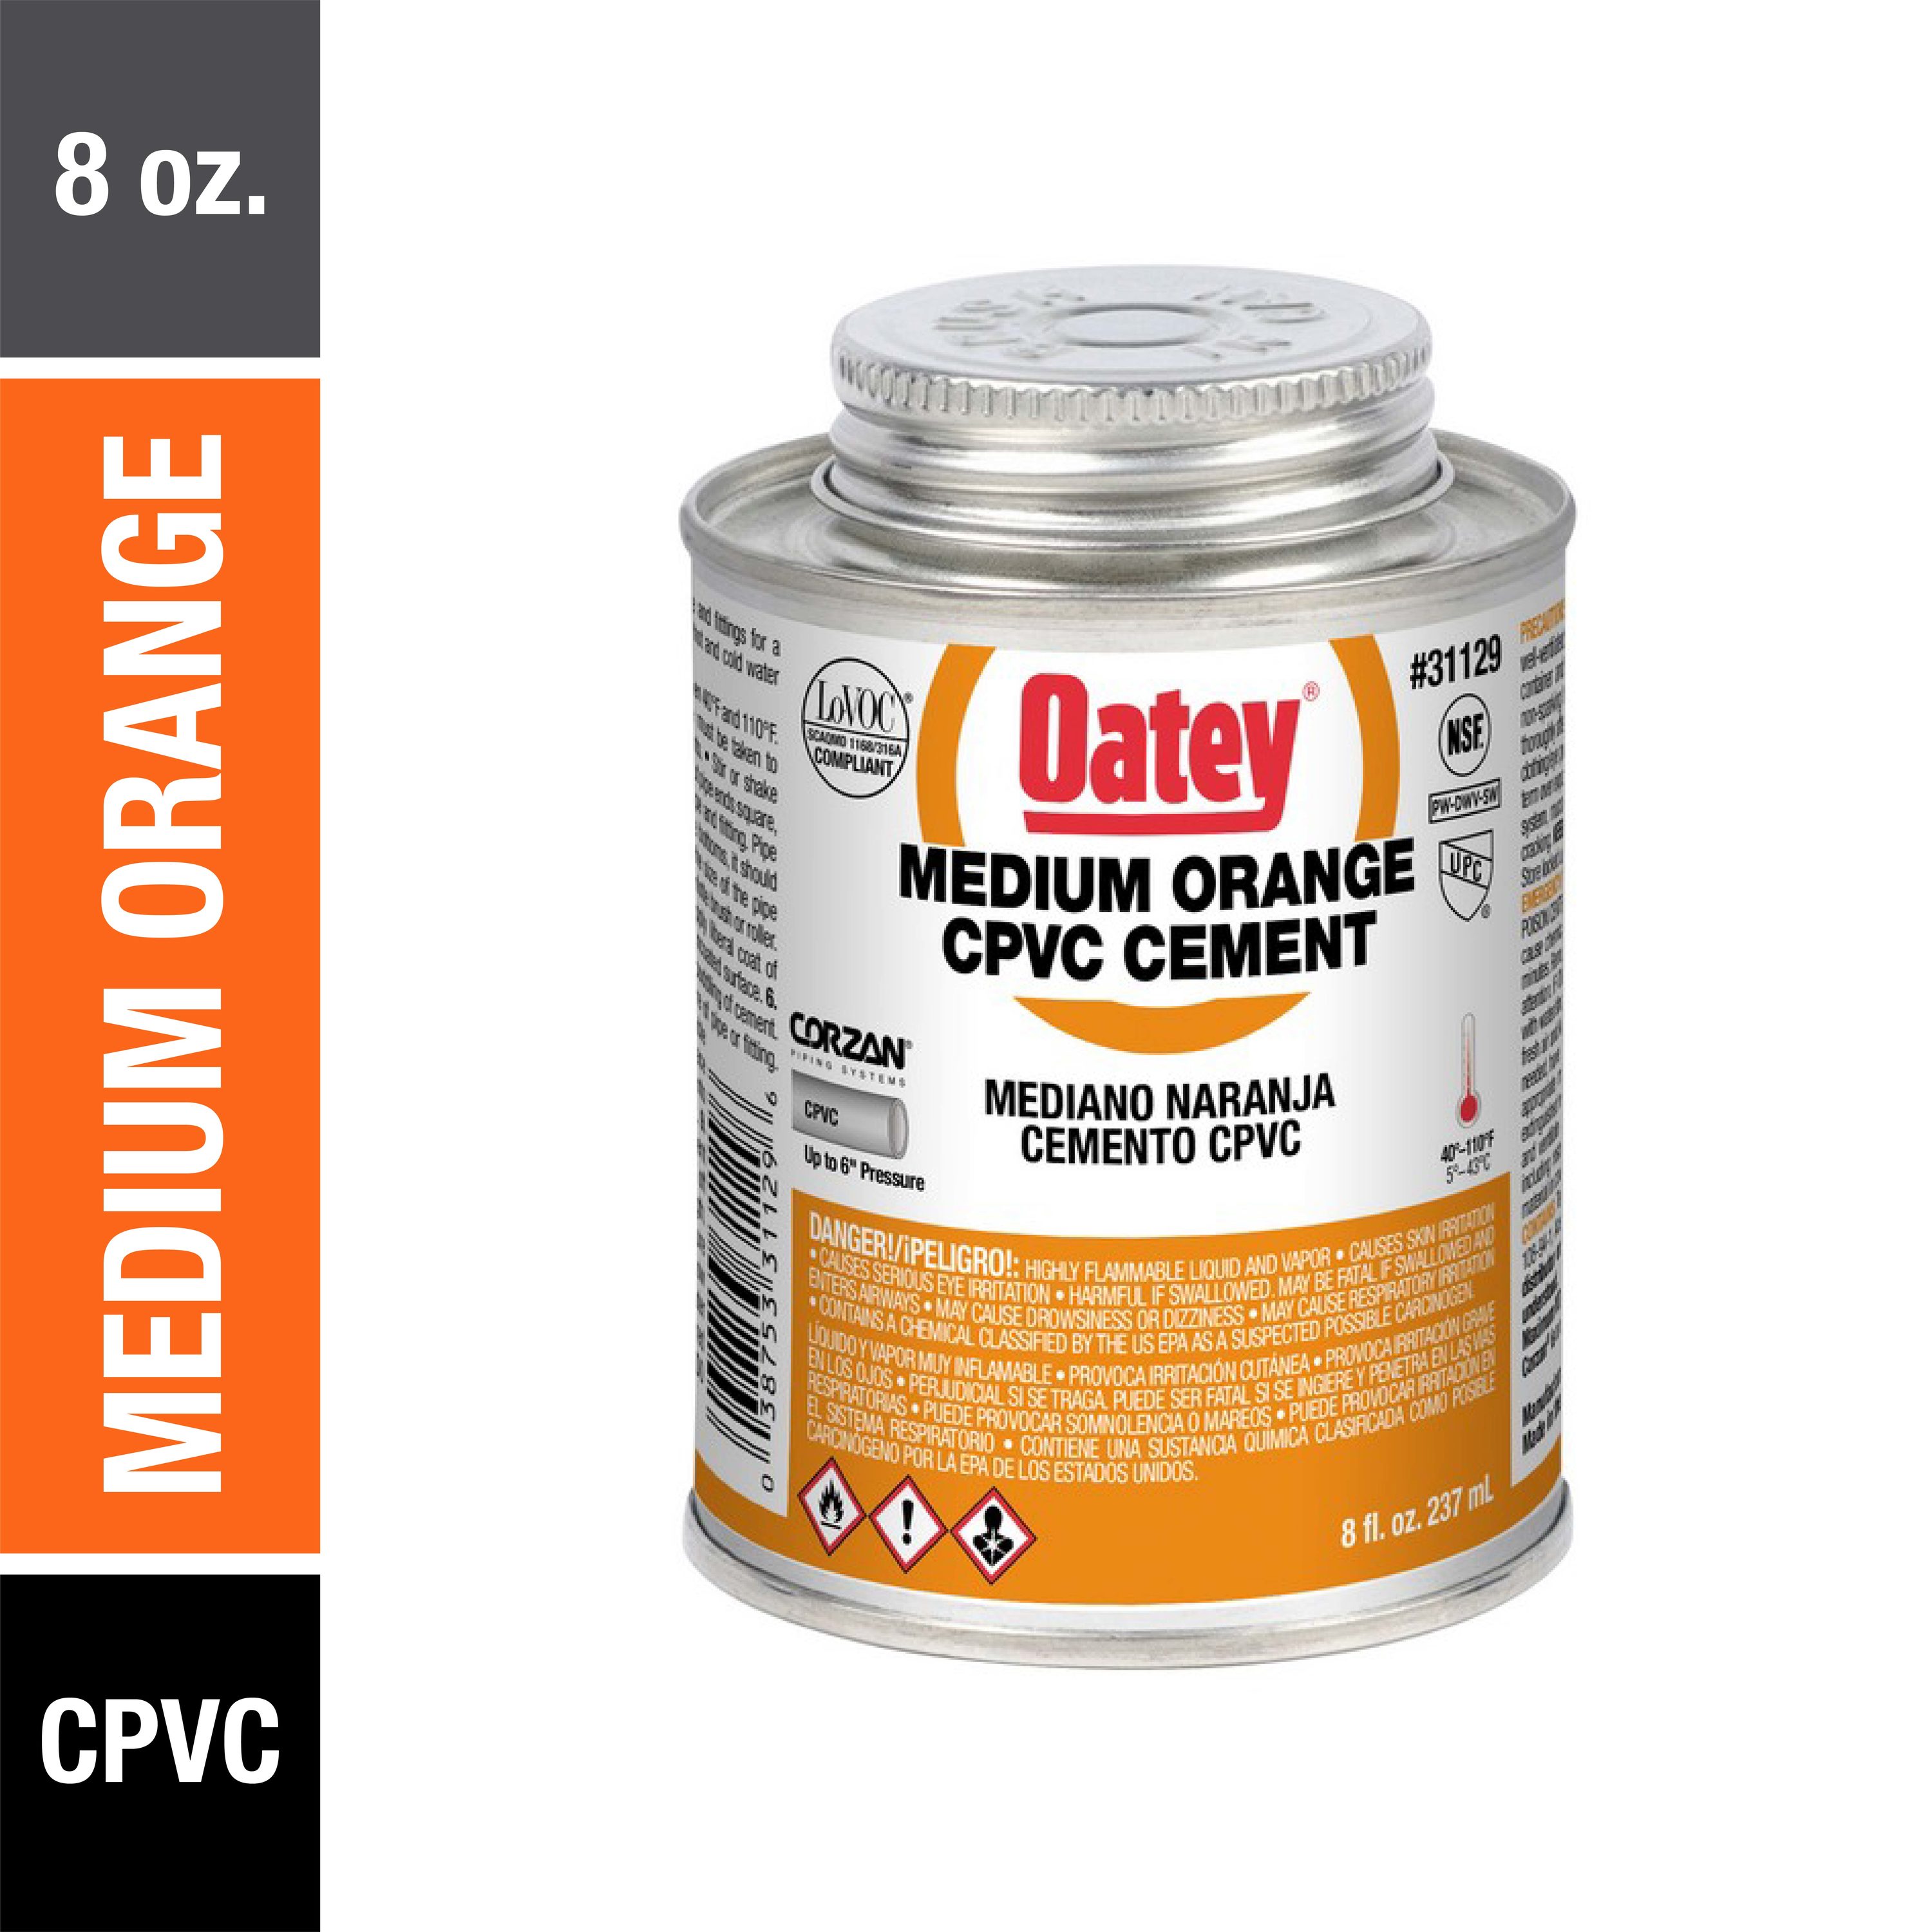 CPVC cement Pipe Cements, Primers & Cleaners at Lowes.com